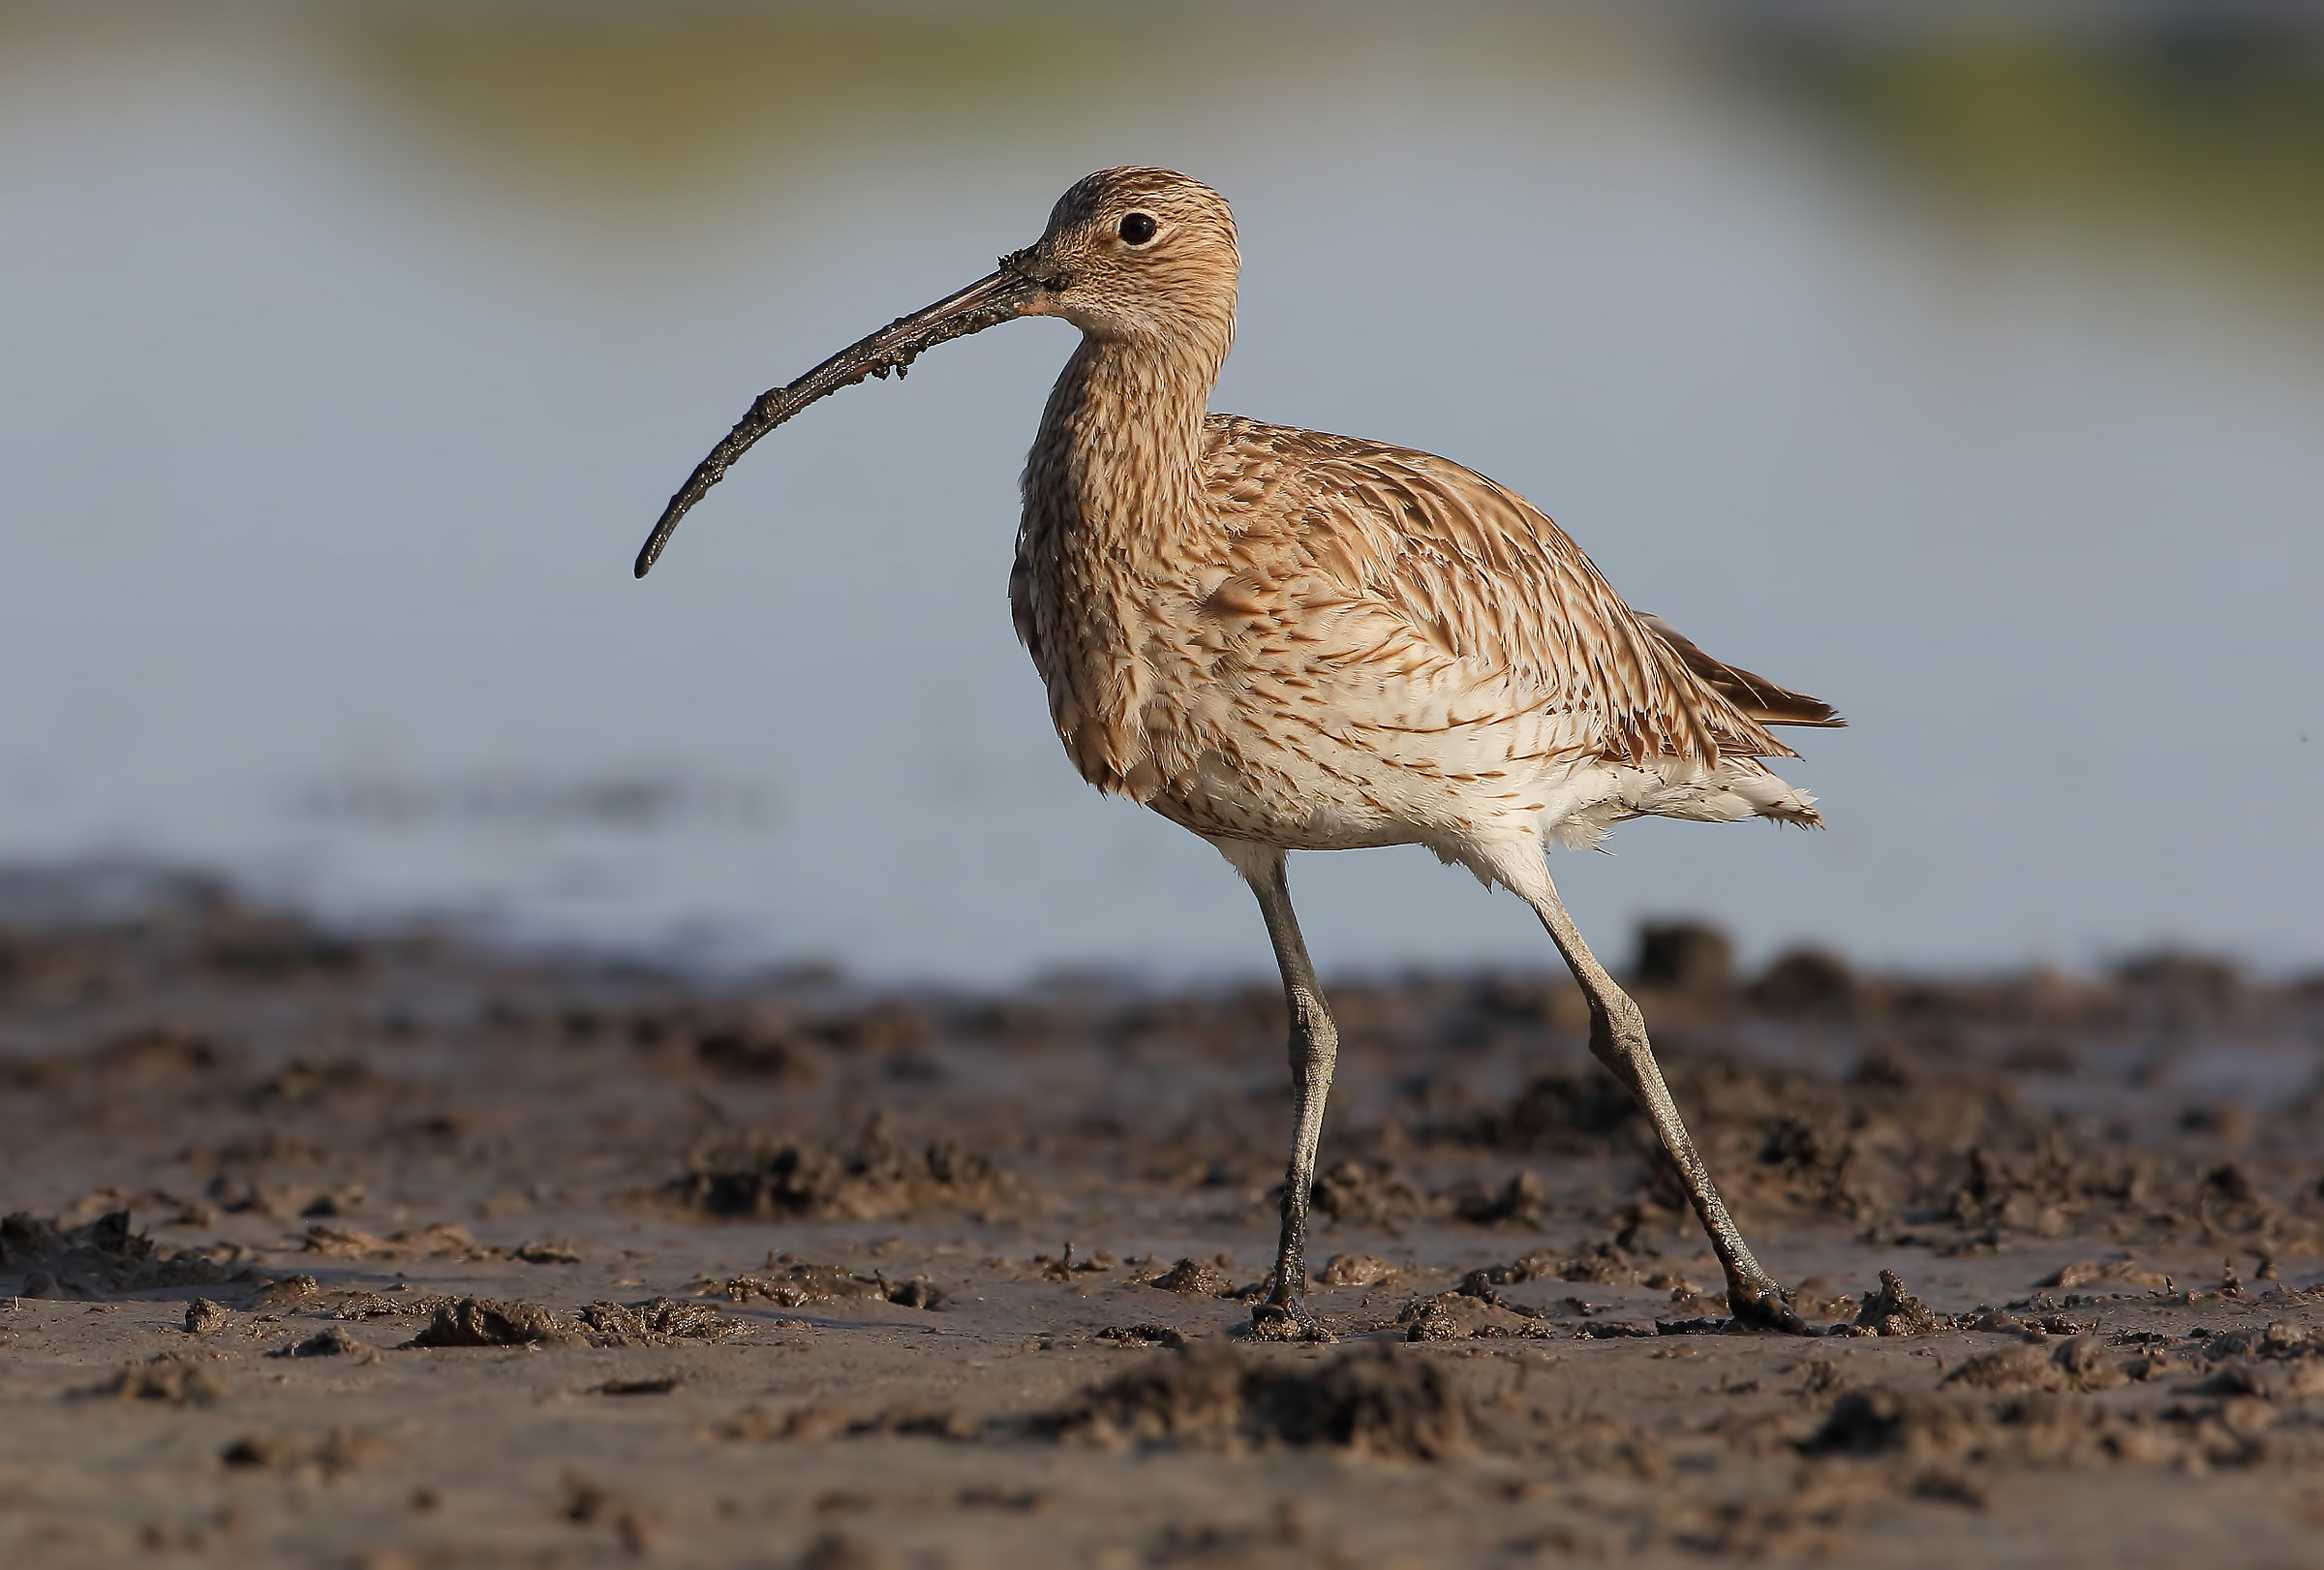 The curlew pose...